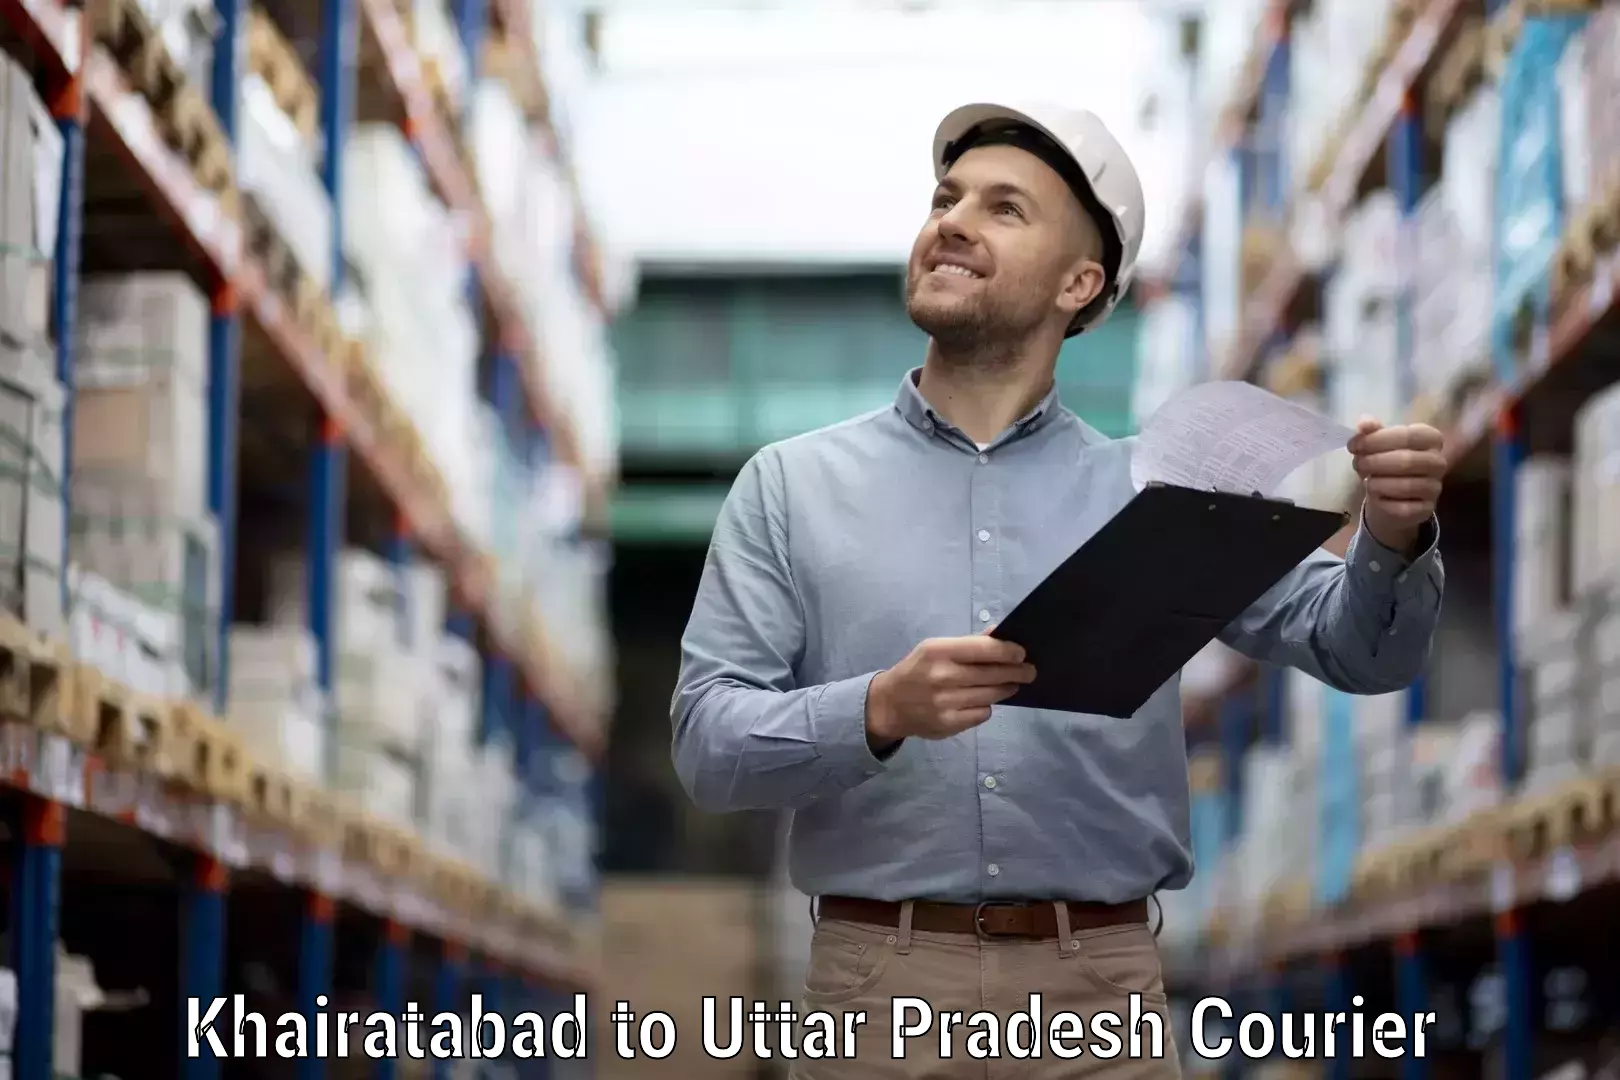 Courier service innovation in Khairatabad to Dadri